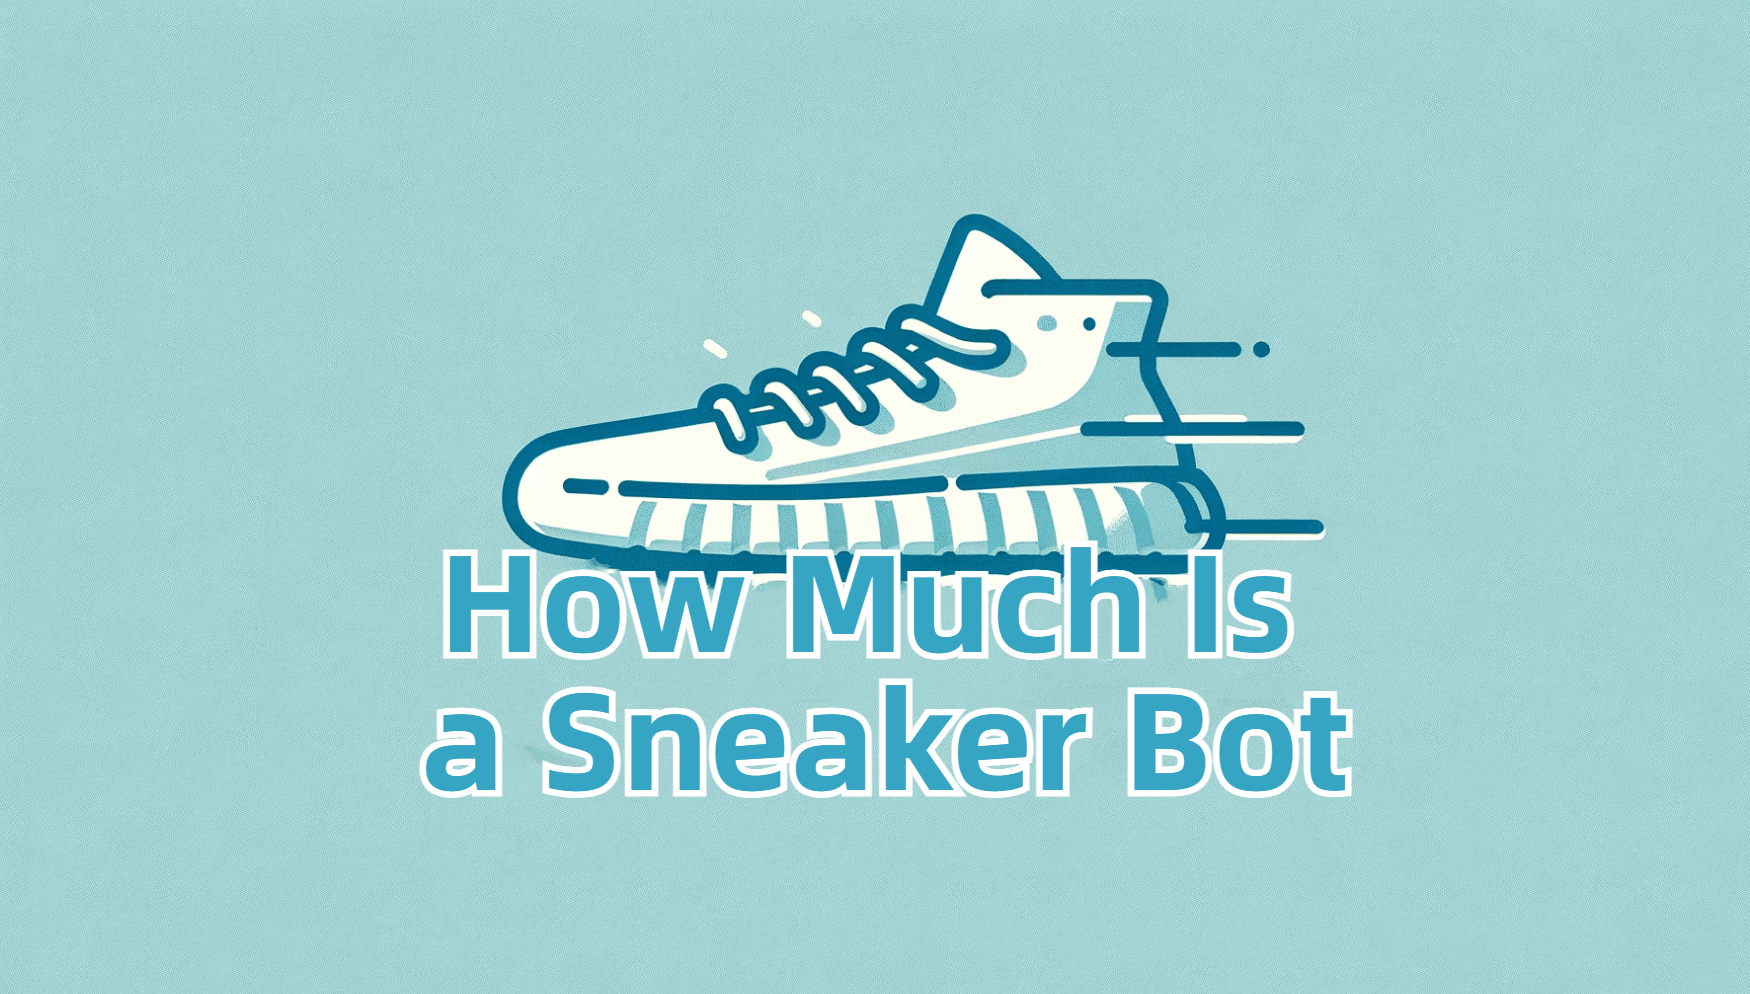 How Much Is a Sneaker Bot